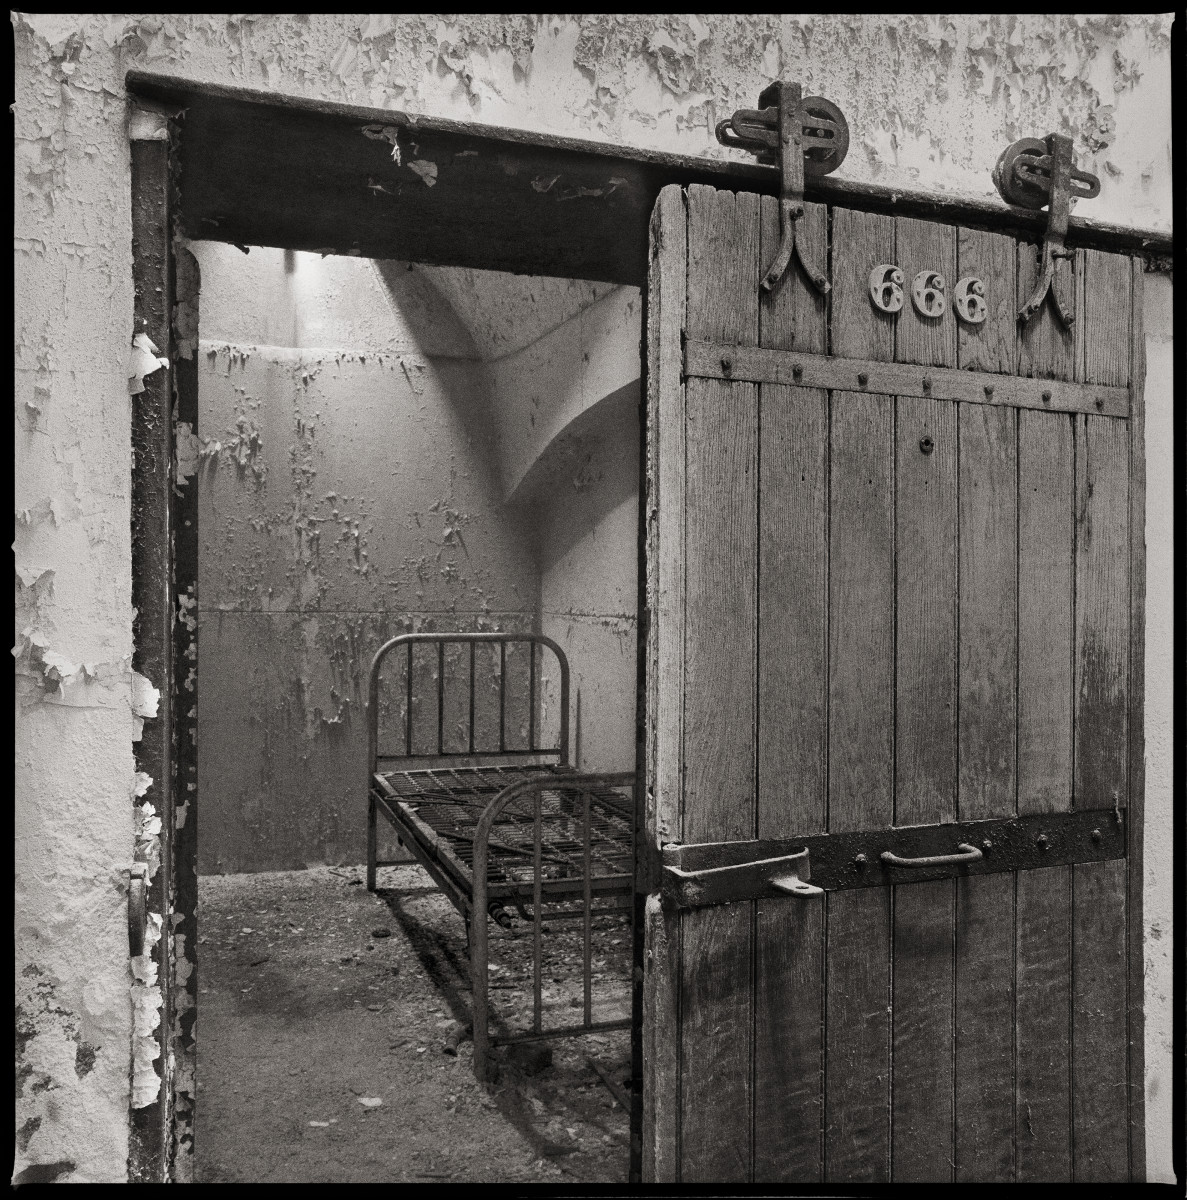 Devil has their Soul by Eric T. Kunsman  Image: ID: A black and white image shows room number 666 with ht door ajar.  There is a metal bed frame inside of the room.  The door is wooden with a metal bar in the center.